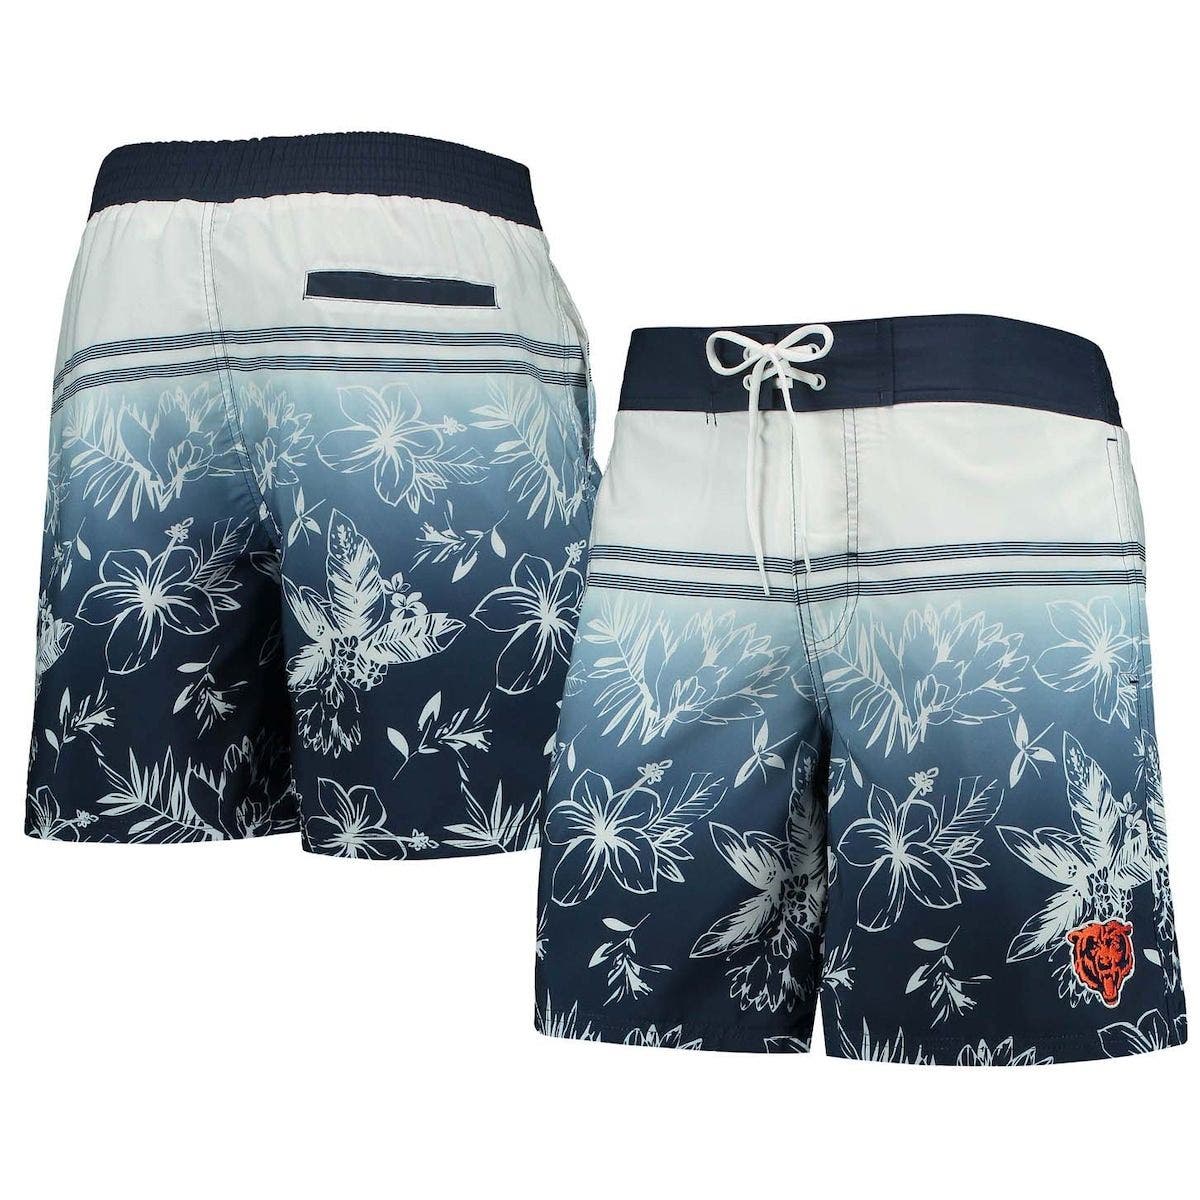 T H F C    Swimshorts Navy/Yellow Small  Free Postage 